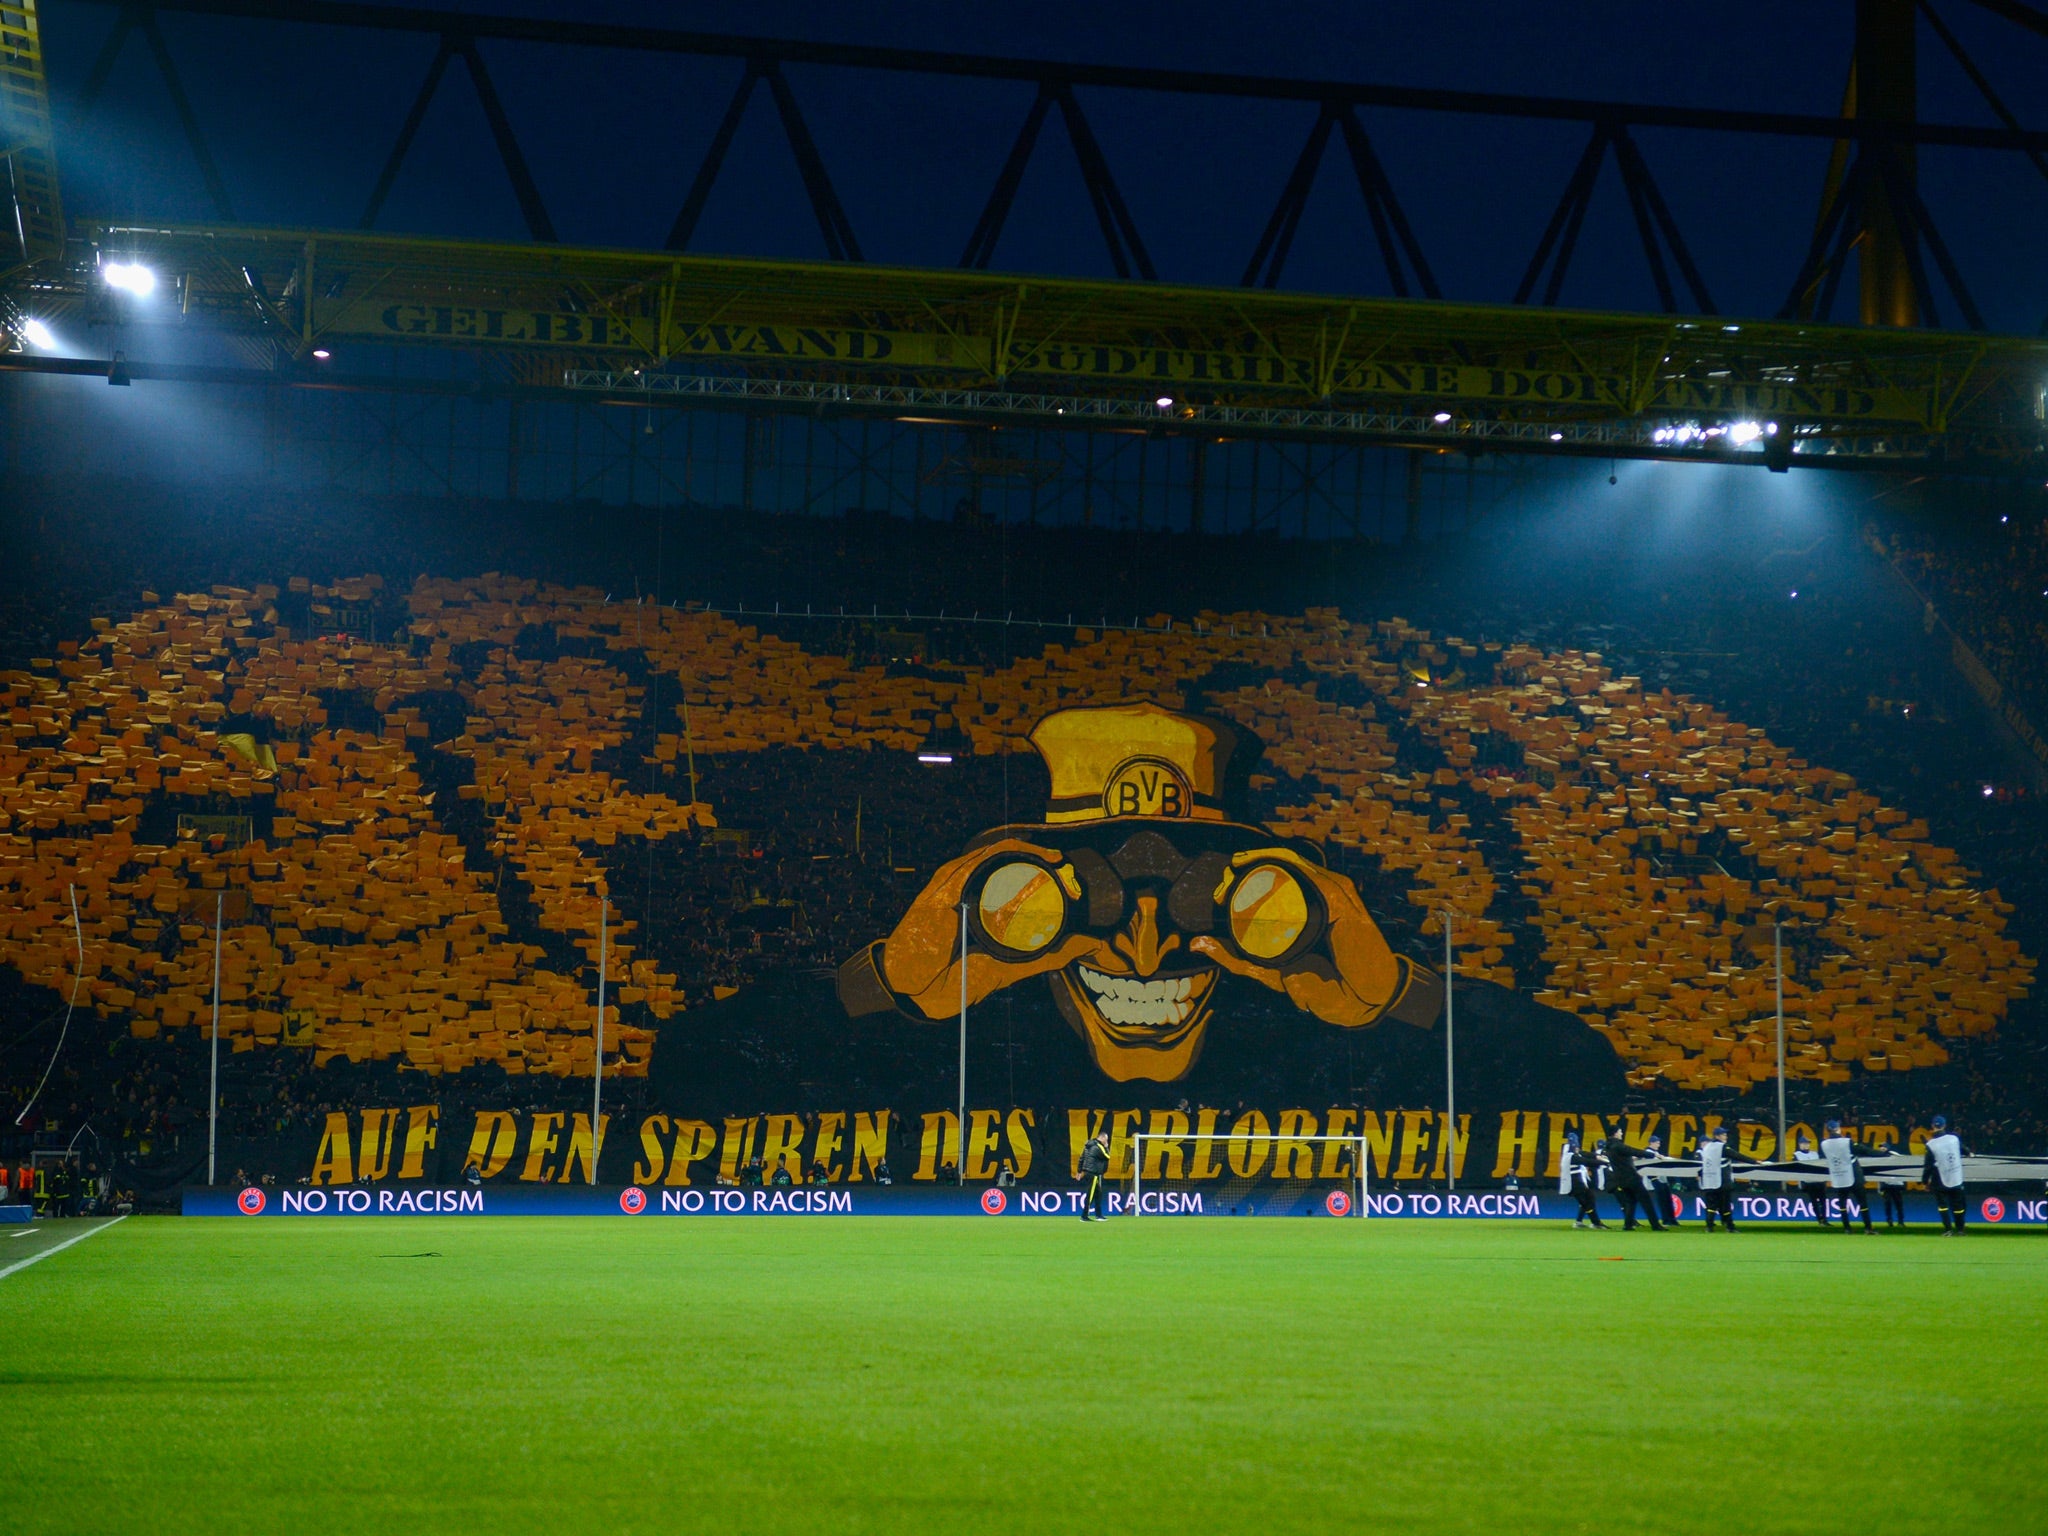 An incredible display put on by Dortmund fans at the Westfalenstadion